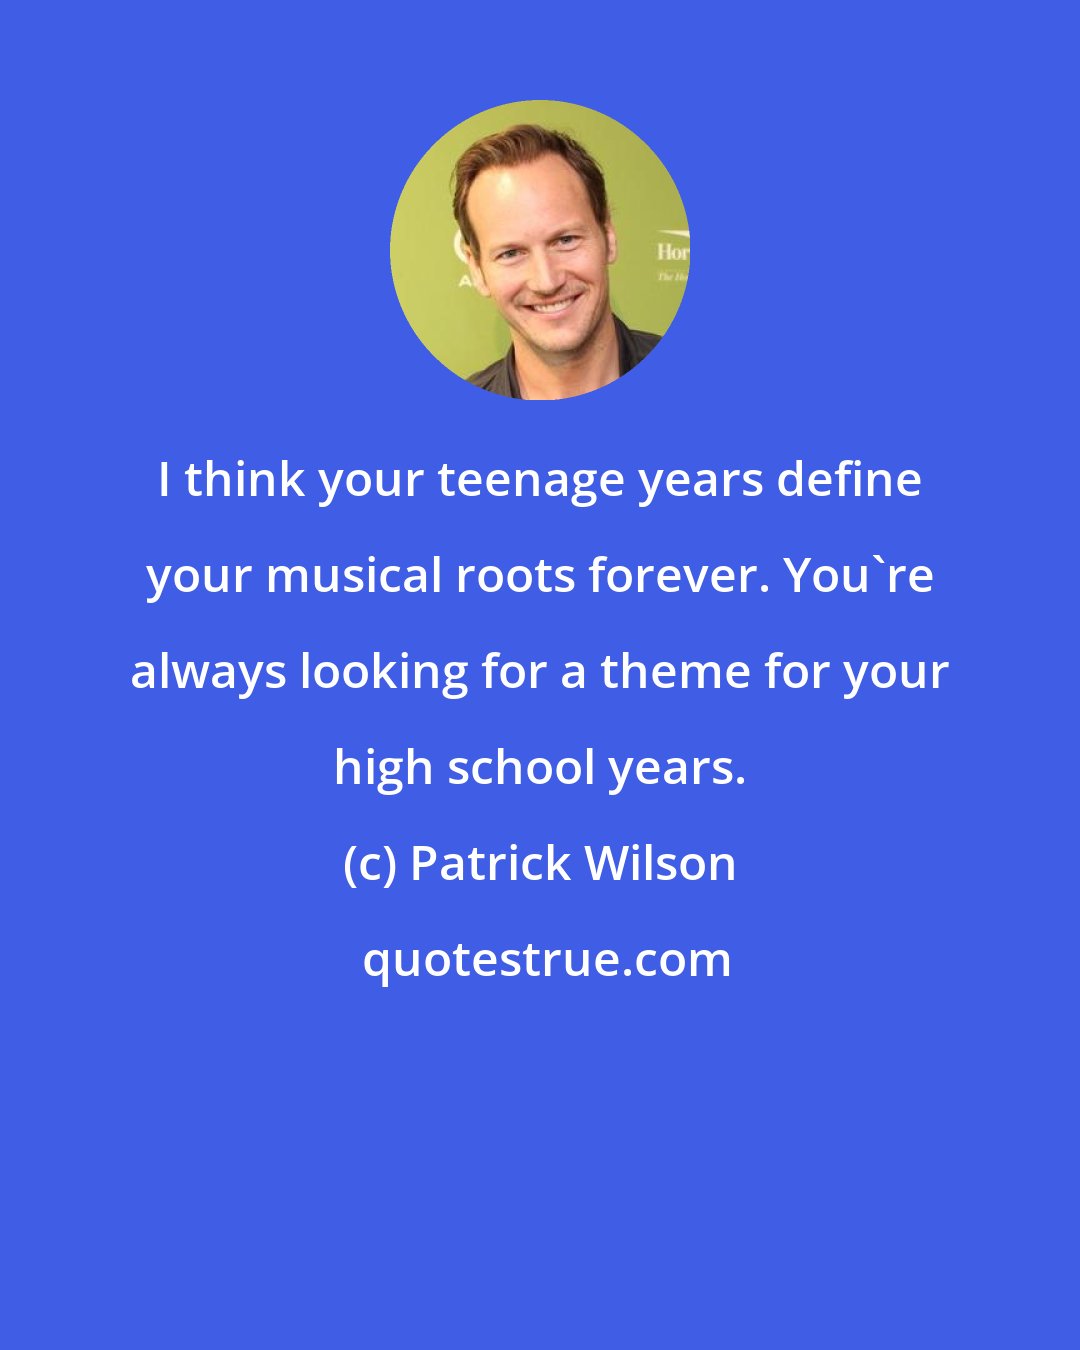 Patrick Wilson: I think your teenage years define your musical roots forever. You're always looking for a theme for your high school years.